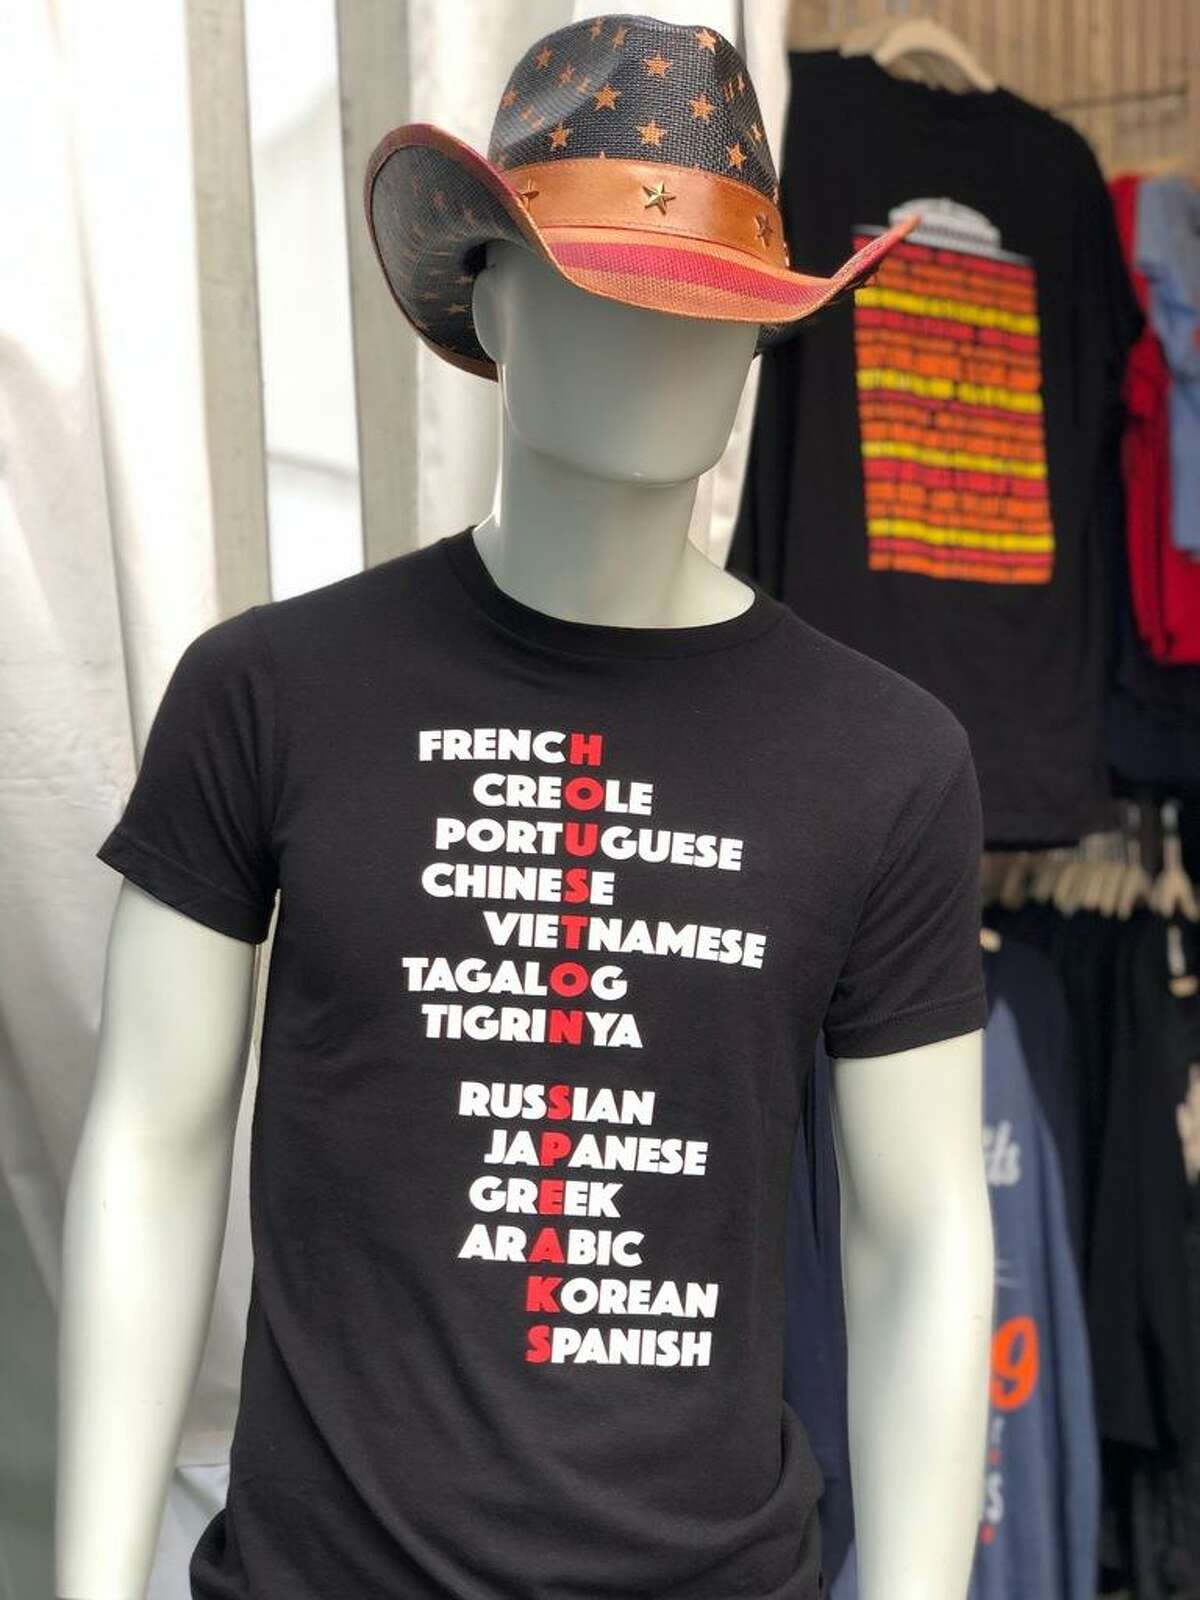 Adonis Alexander launched his Diverscity Clothing Co. in 2017 when he got laid off from his job at MD Anderson Cancer Center. The native Houstonian hoped getting into the Houston Livestock Show and Rodeo would mean a breakout year for him. Instead, he's left with hundreds of T shirts, backpacks, hats and other items to sell.